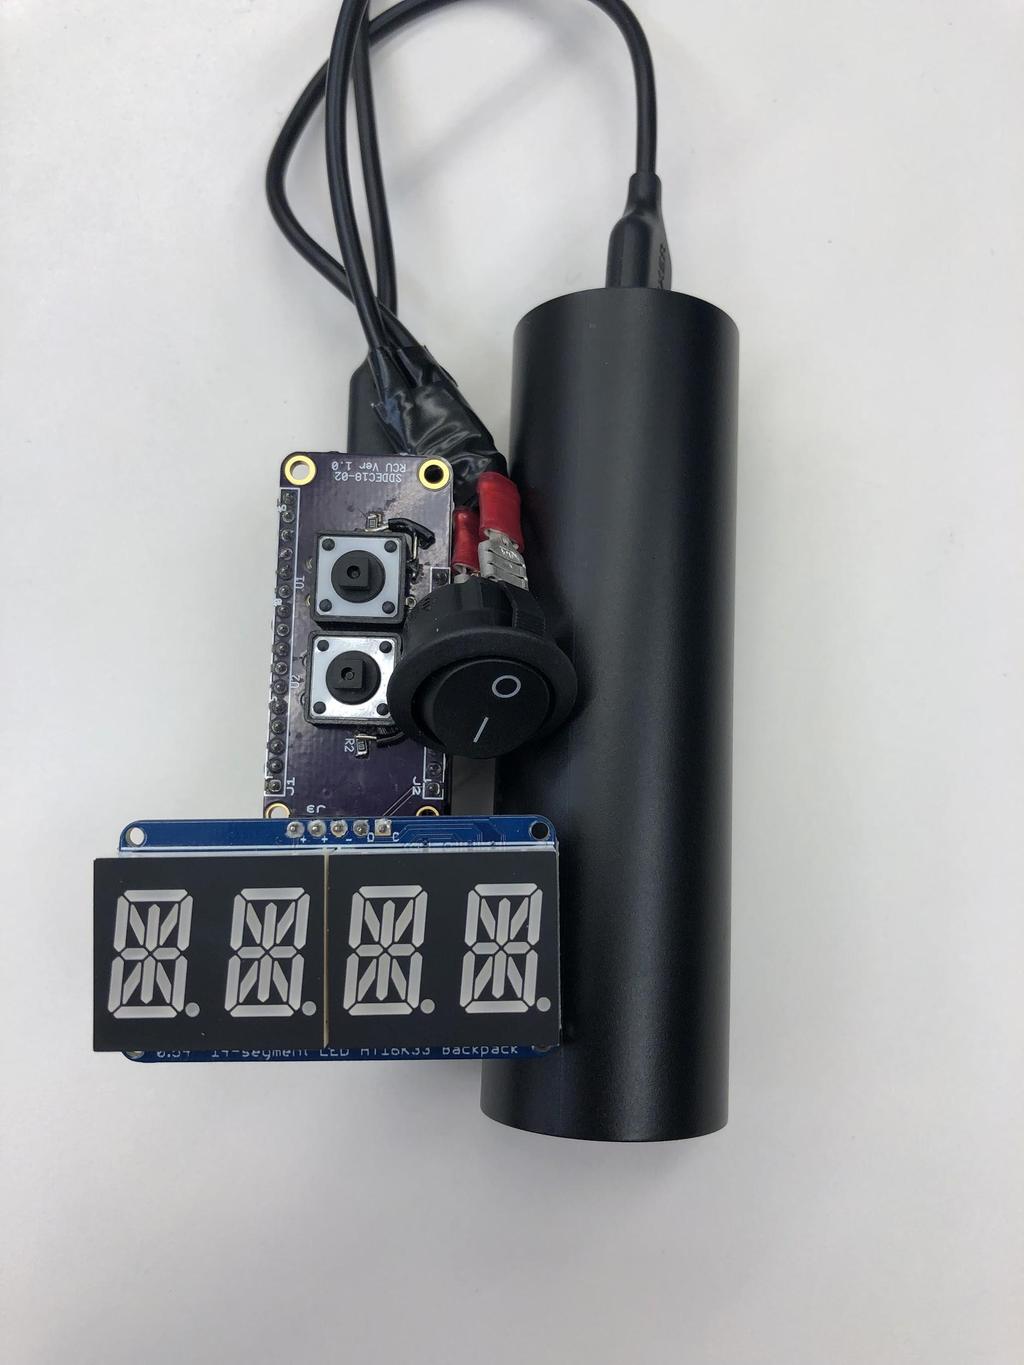 RCU Design Main Controller: Adafruit Huzzah with ESP8266 Battery operated Connects to the MCU using TCP sockets and sends the change in temperature Displays current temperature, set temperature and